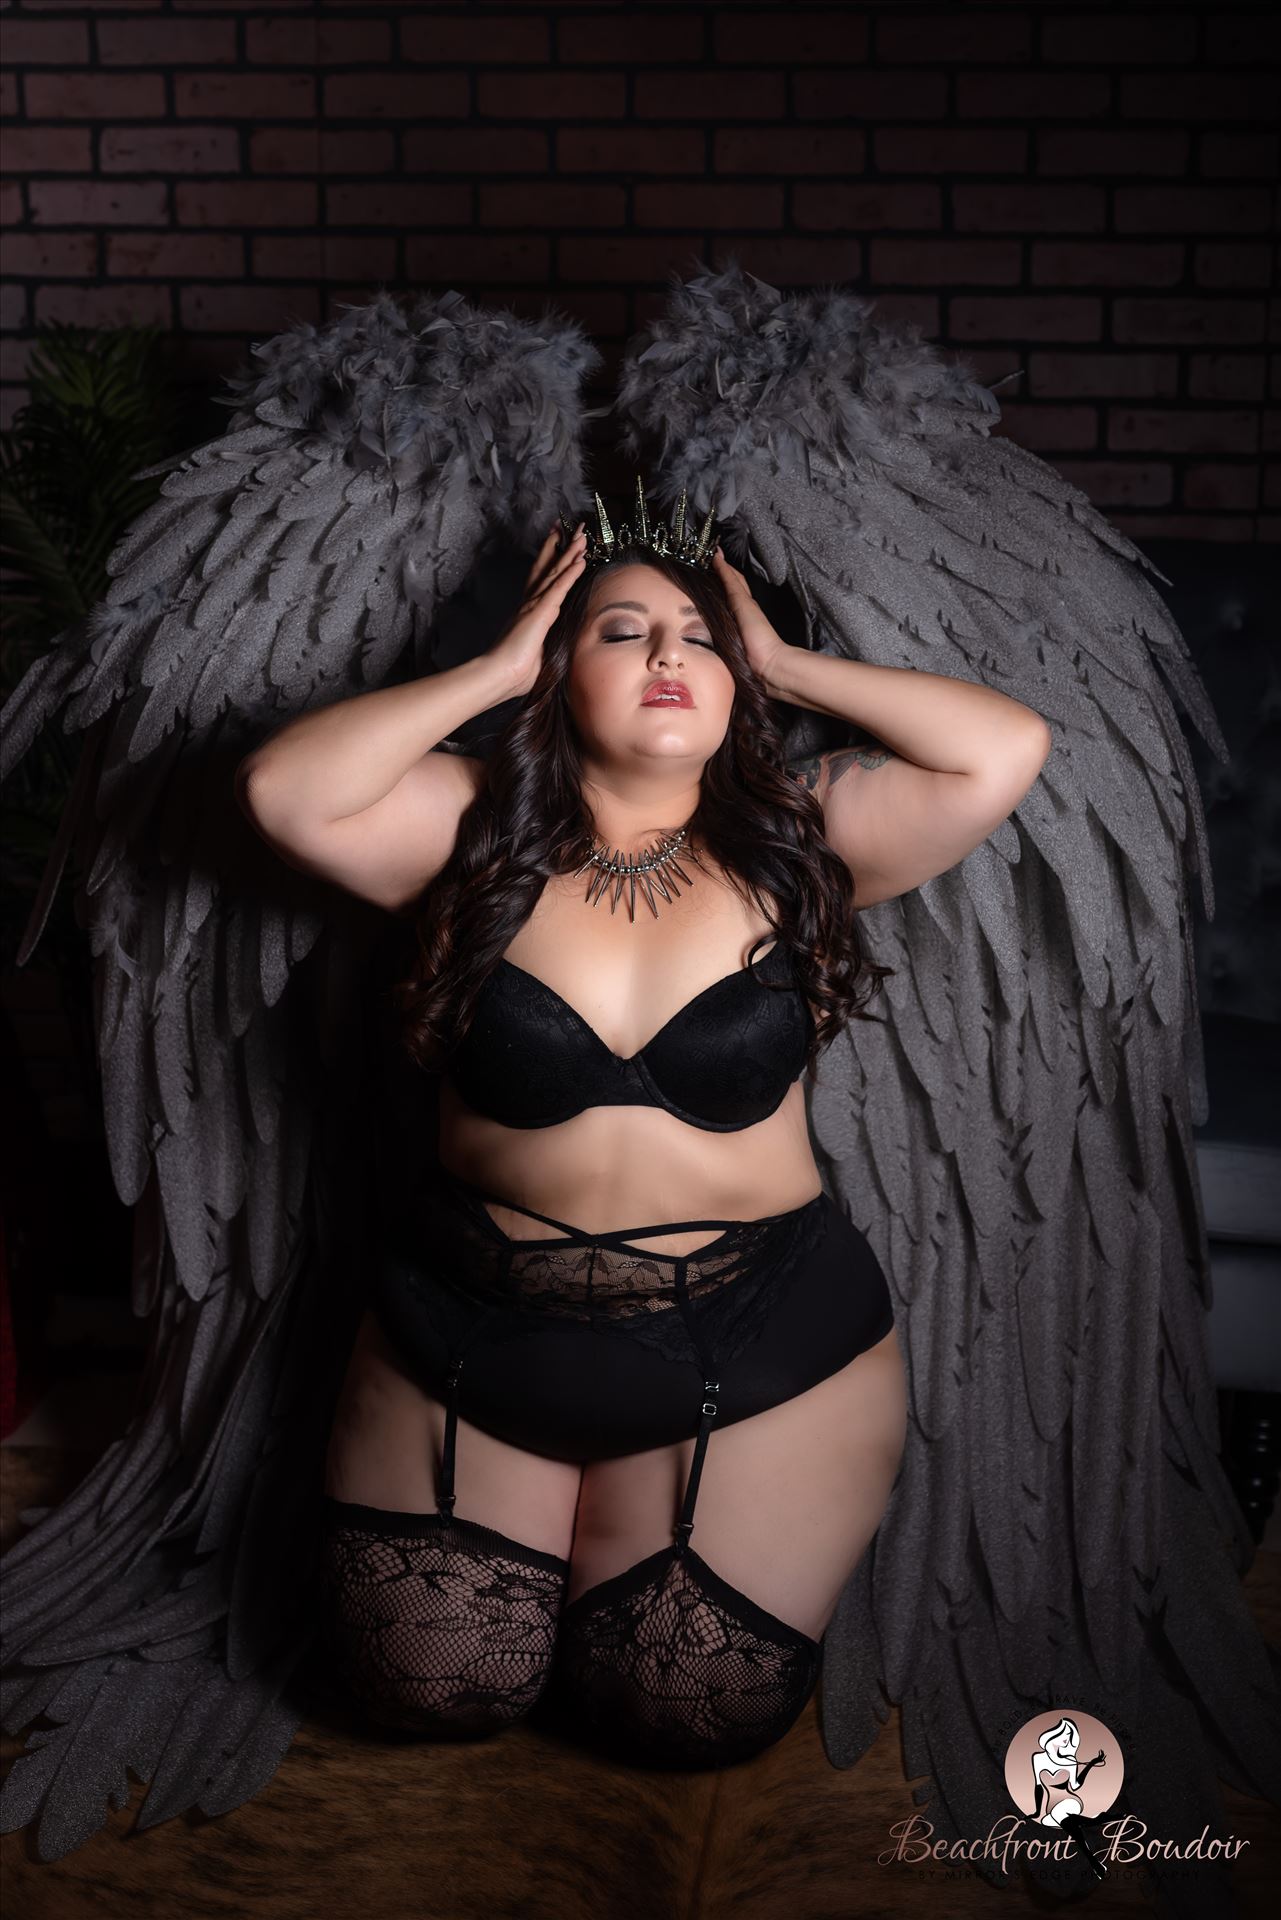 Port-2.JPG - Beachfront Boudoir by Mirror's Edge Photography is a Boutique Luxury Boudoir Photography Studio located in San Luis Obispo County. My mission is to show as many women as possible how beautiful they truly are! Curvy wings Latina boudoir by Sarah Williams